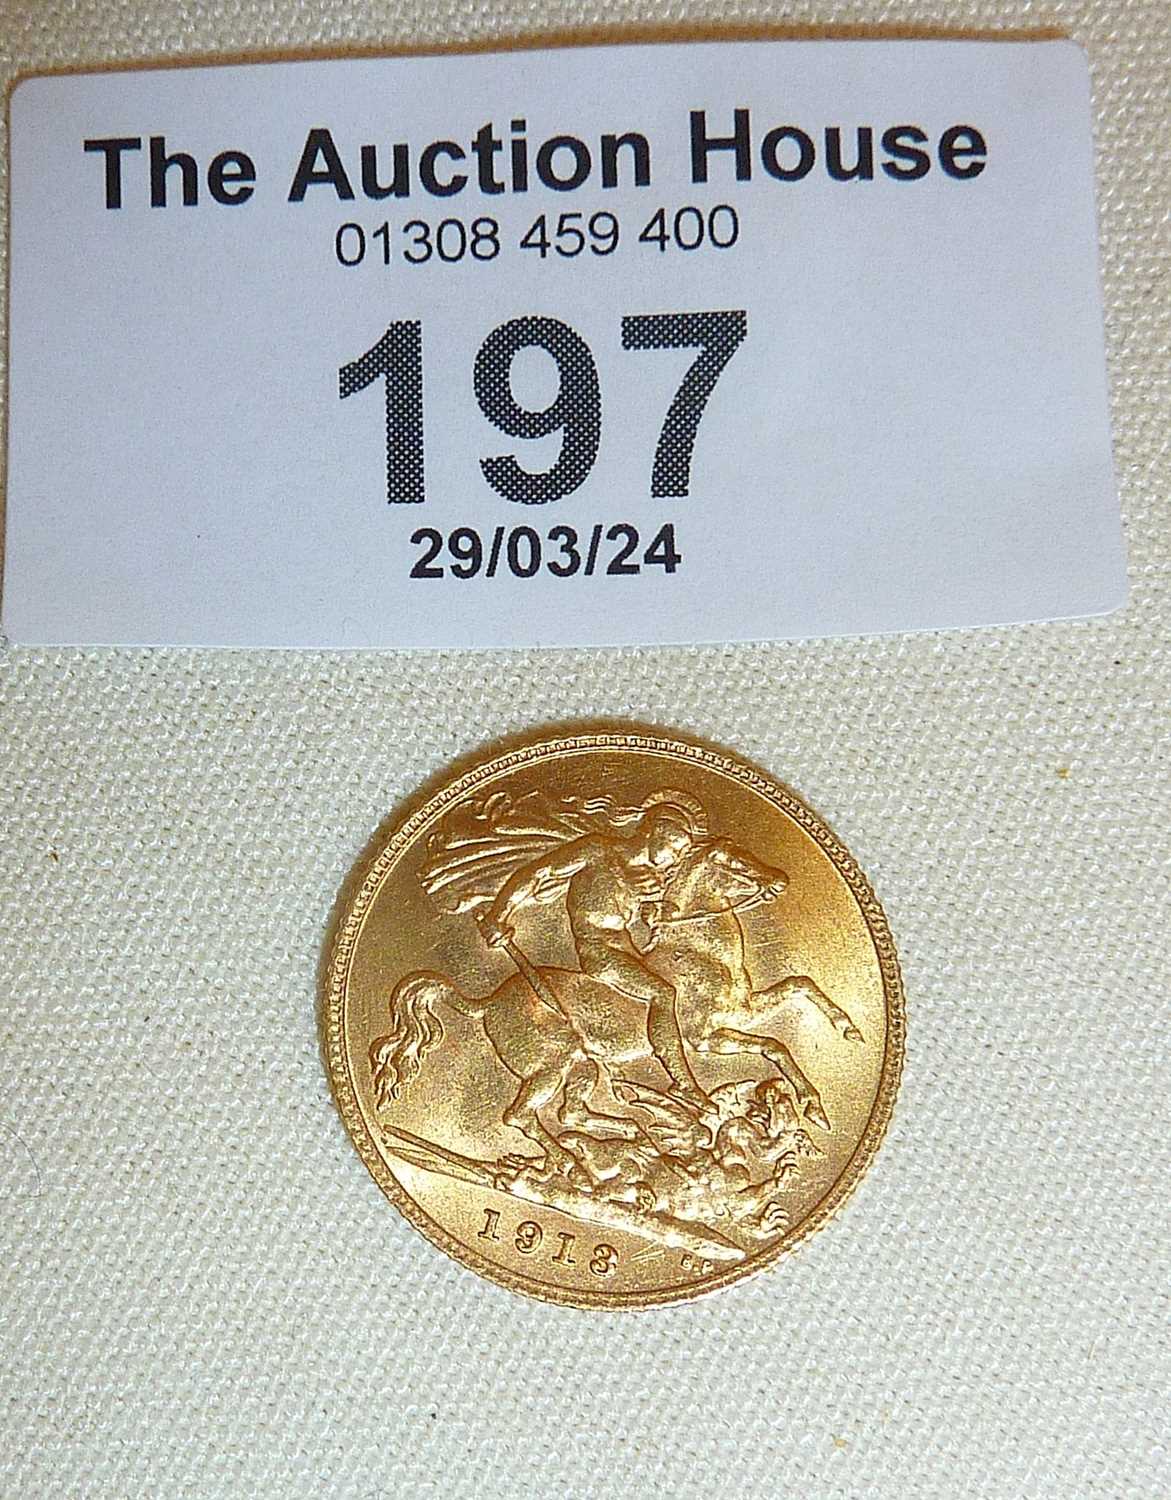 1913 Half Sovereign - Image 2 of 2